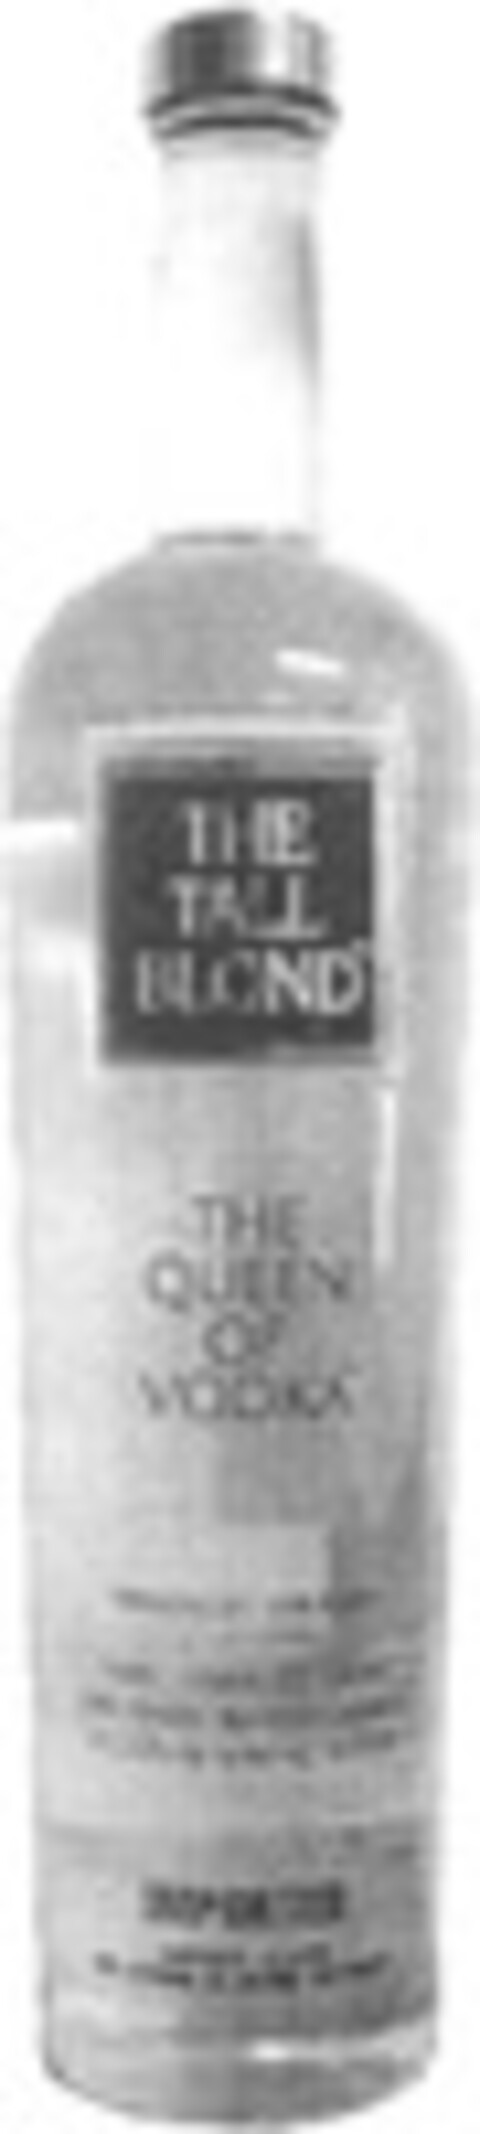 THE TALL BLOND THE QUEEN OF VODKA Logo (WIPO, 22.04.2002)